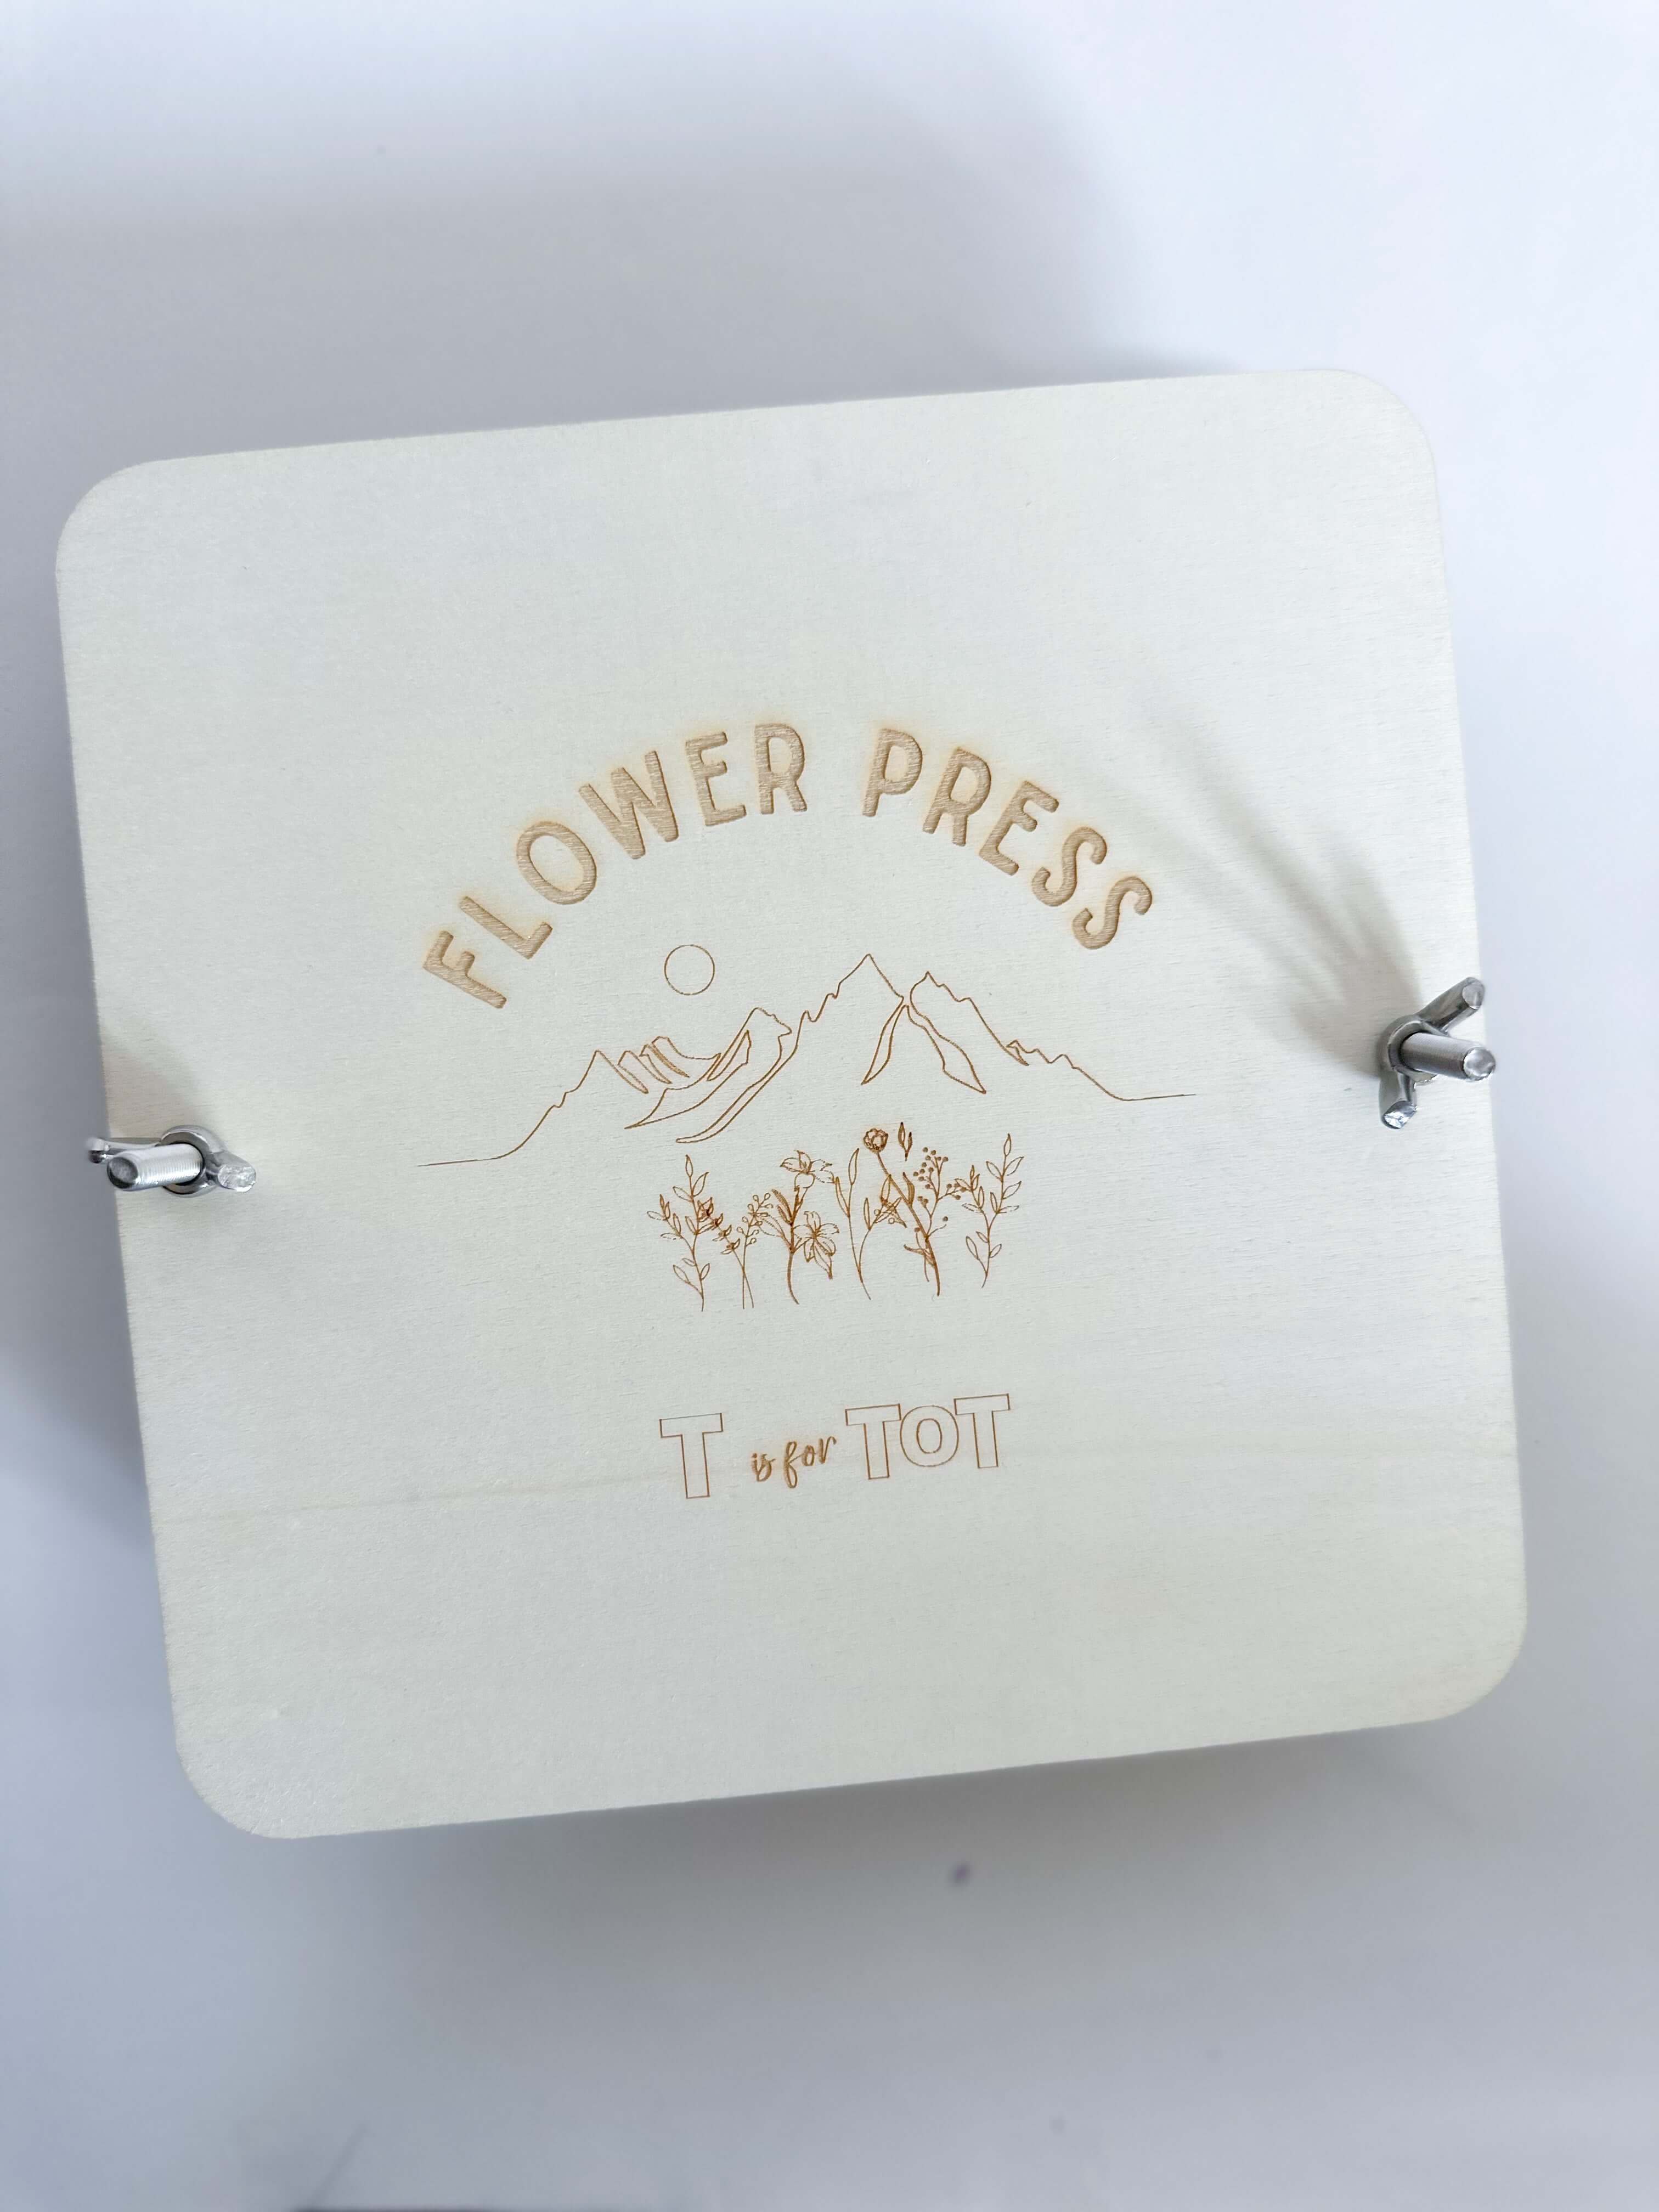 Custom-made flower press kit for kids to create unique flower crafts. Ideal for young nature lovers, this kit offers play-based fun and hands-on learning with flowers and leaves. Perfect for creative activities and exploring the outdoors.